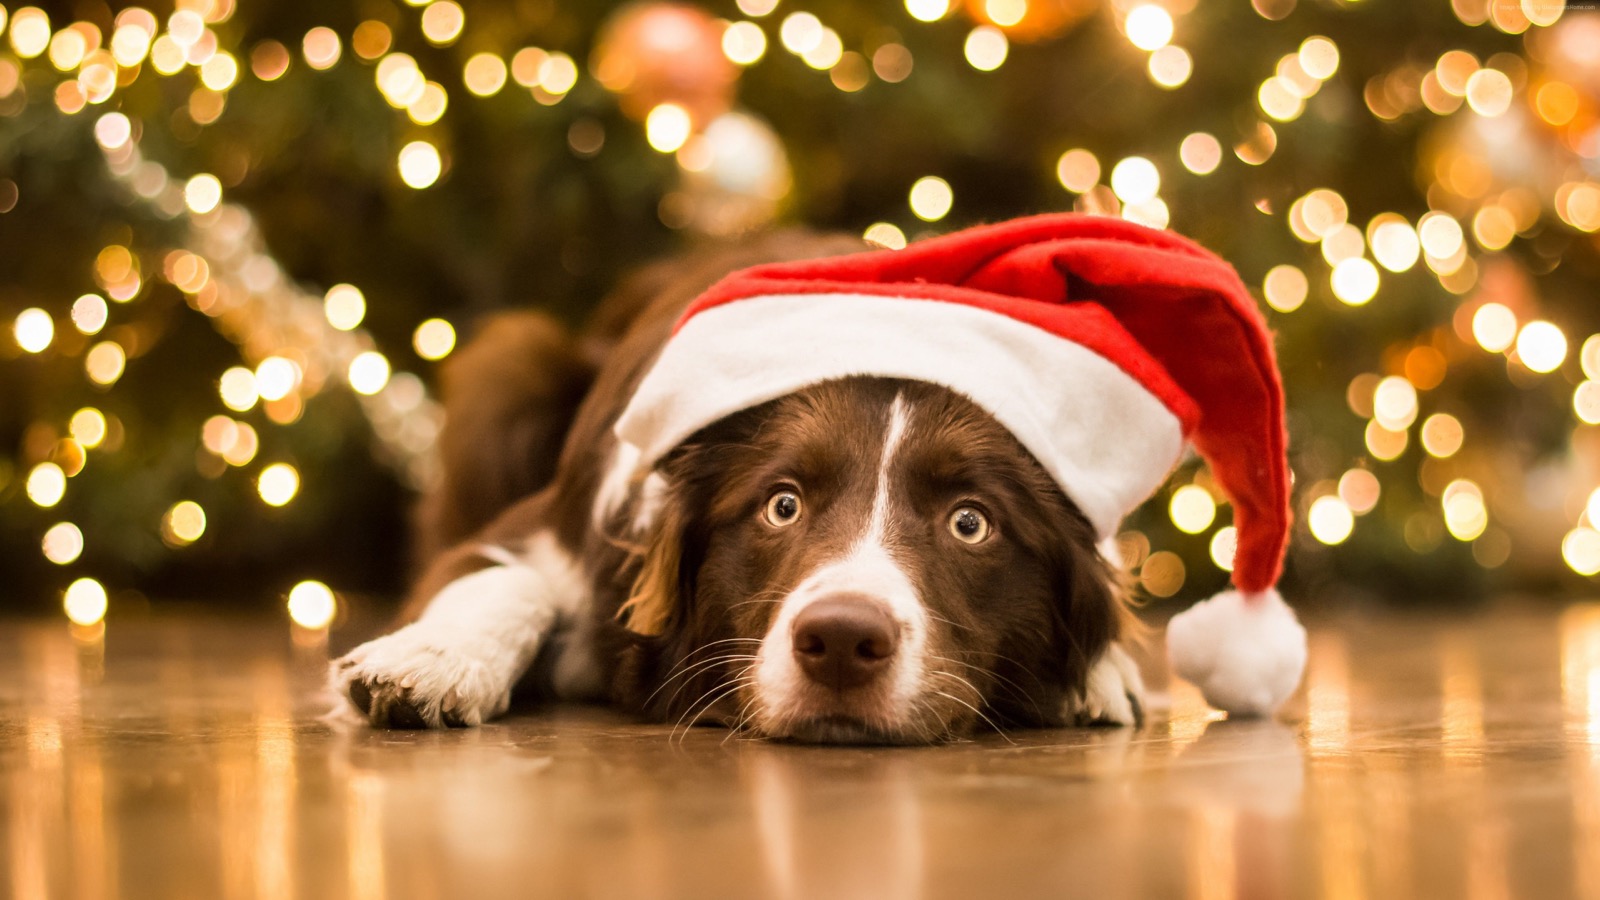 80% Of People Can’t Get 12/18 on This General Knowledge Quiz (feat. Charlie Chaplin) — Can You? Christmas Border Collie Puppy